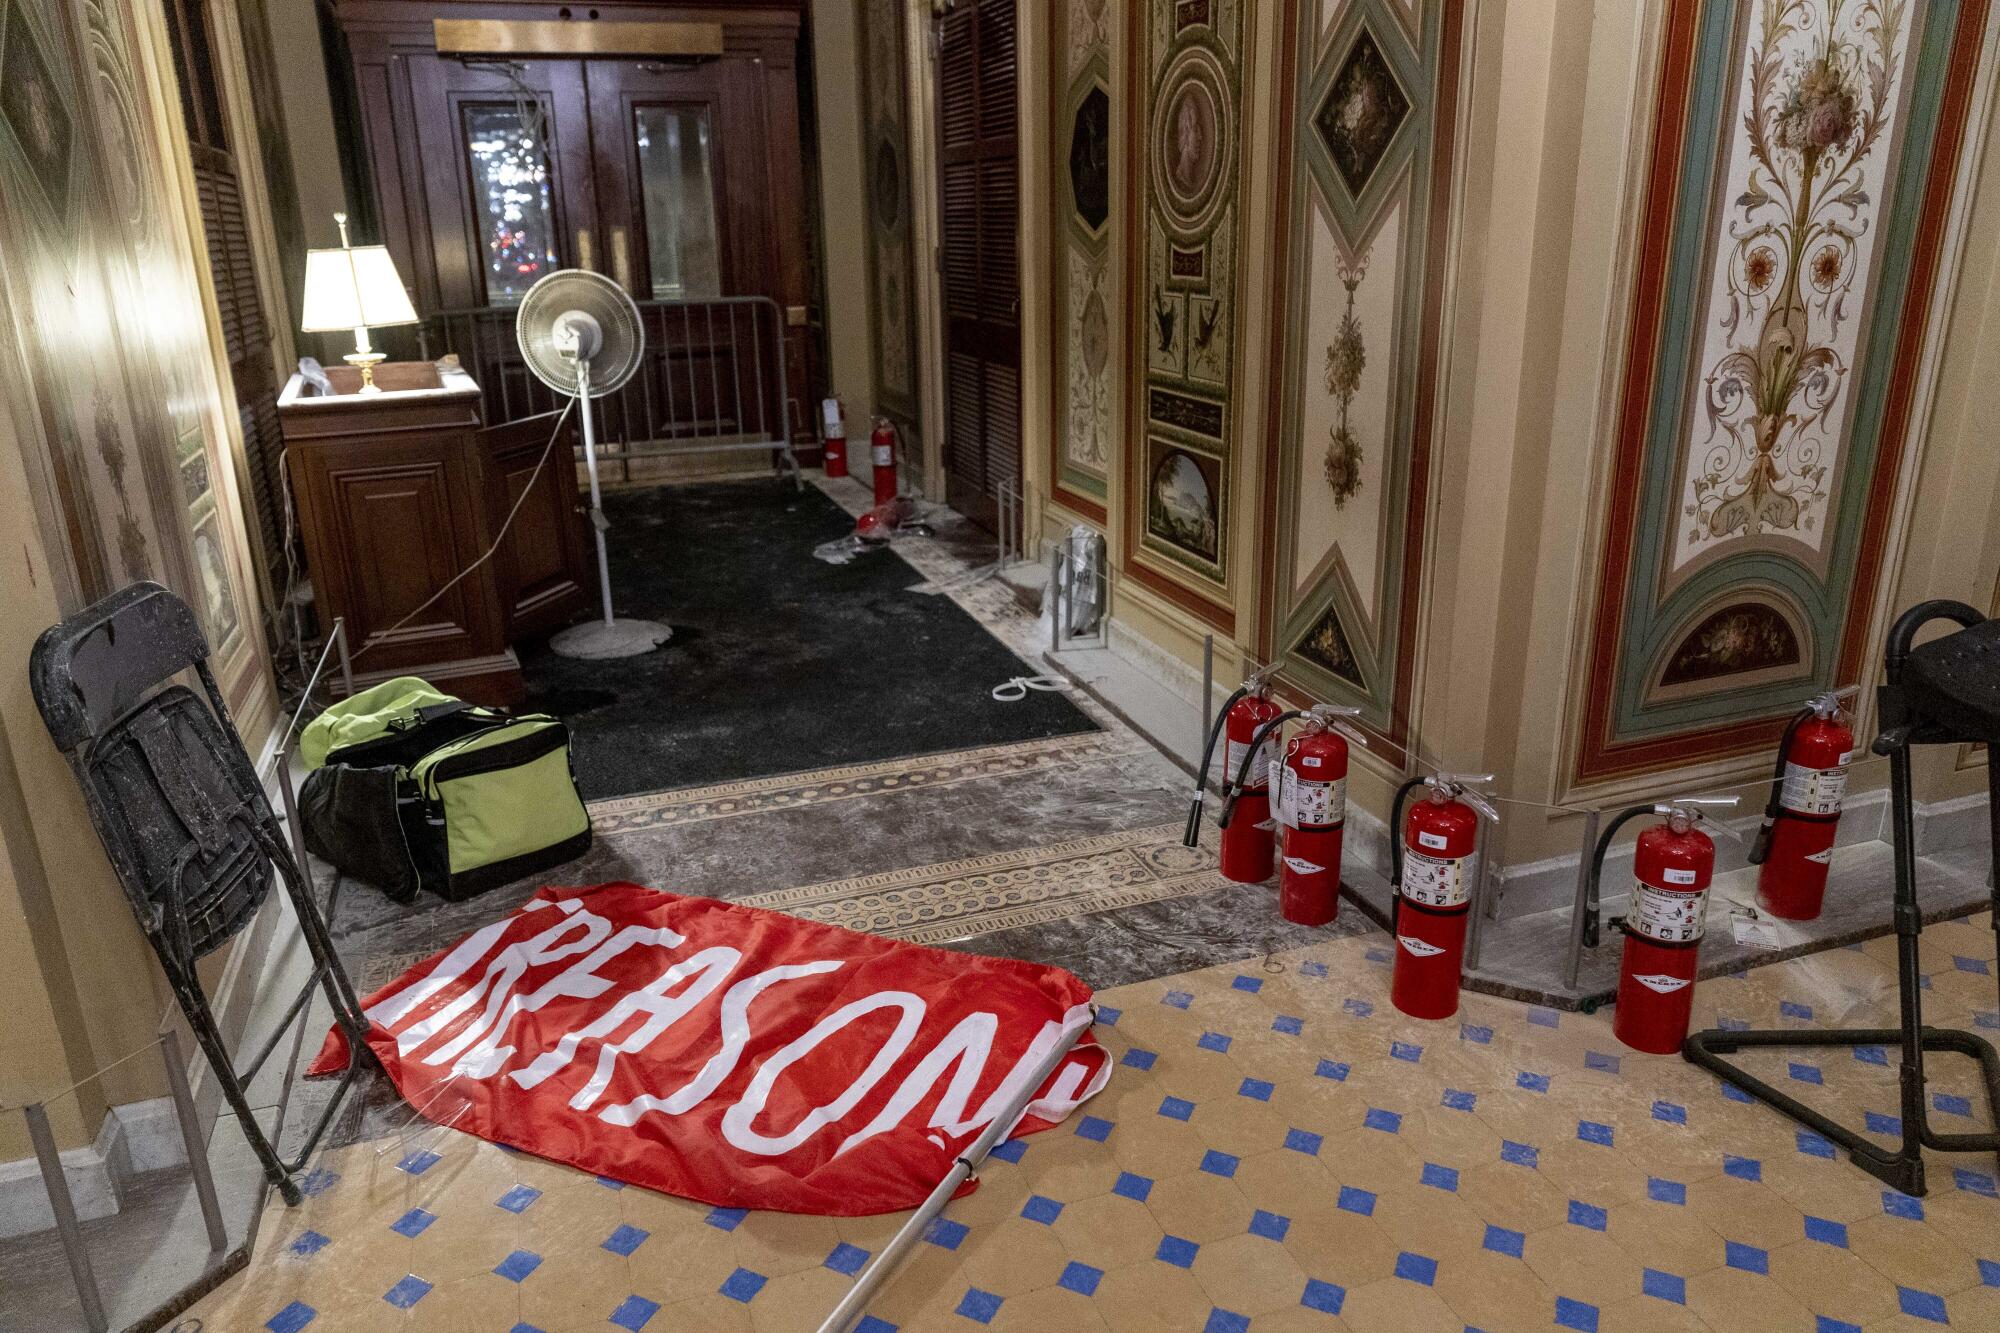 A flag that reads "Treason" lies on the floor in the early morning hours after protesters stormed the Capitol.